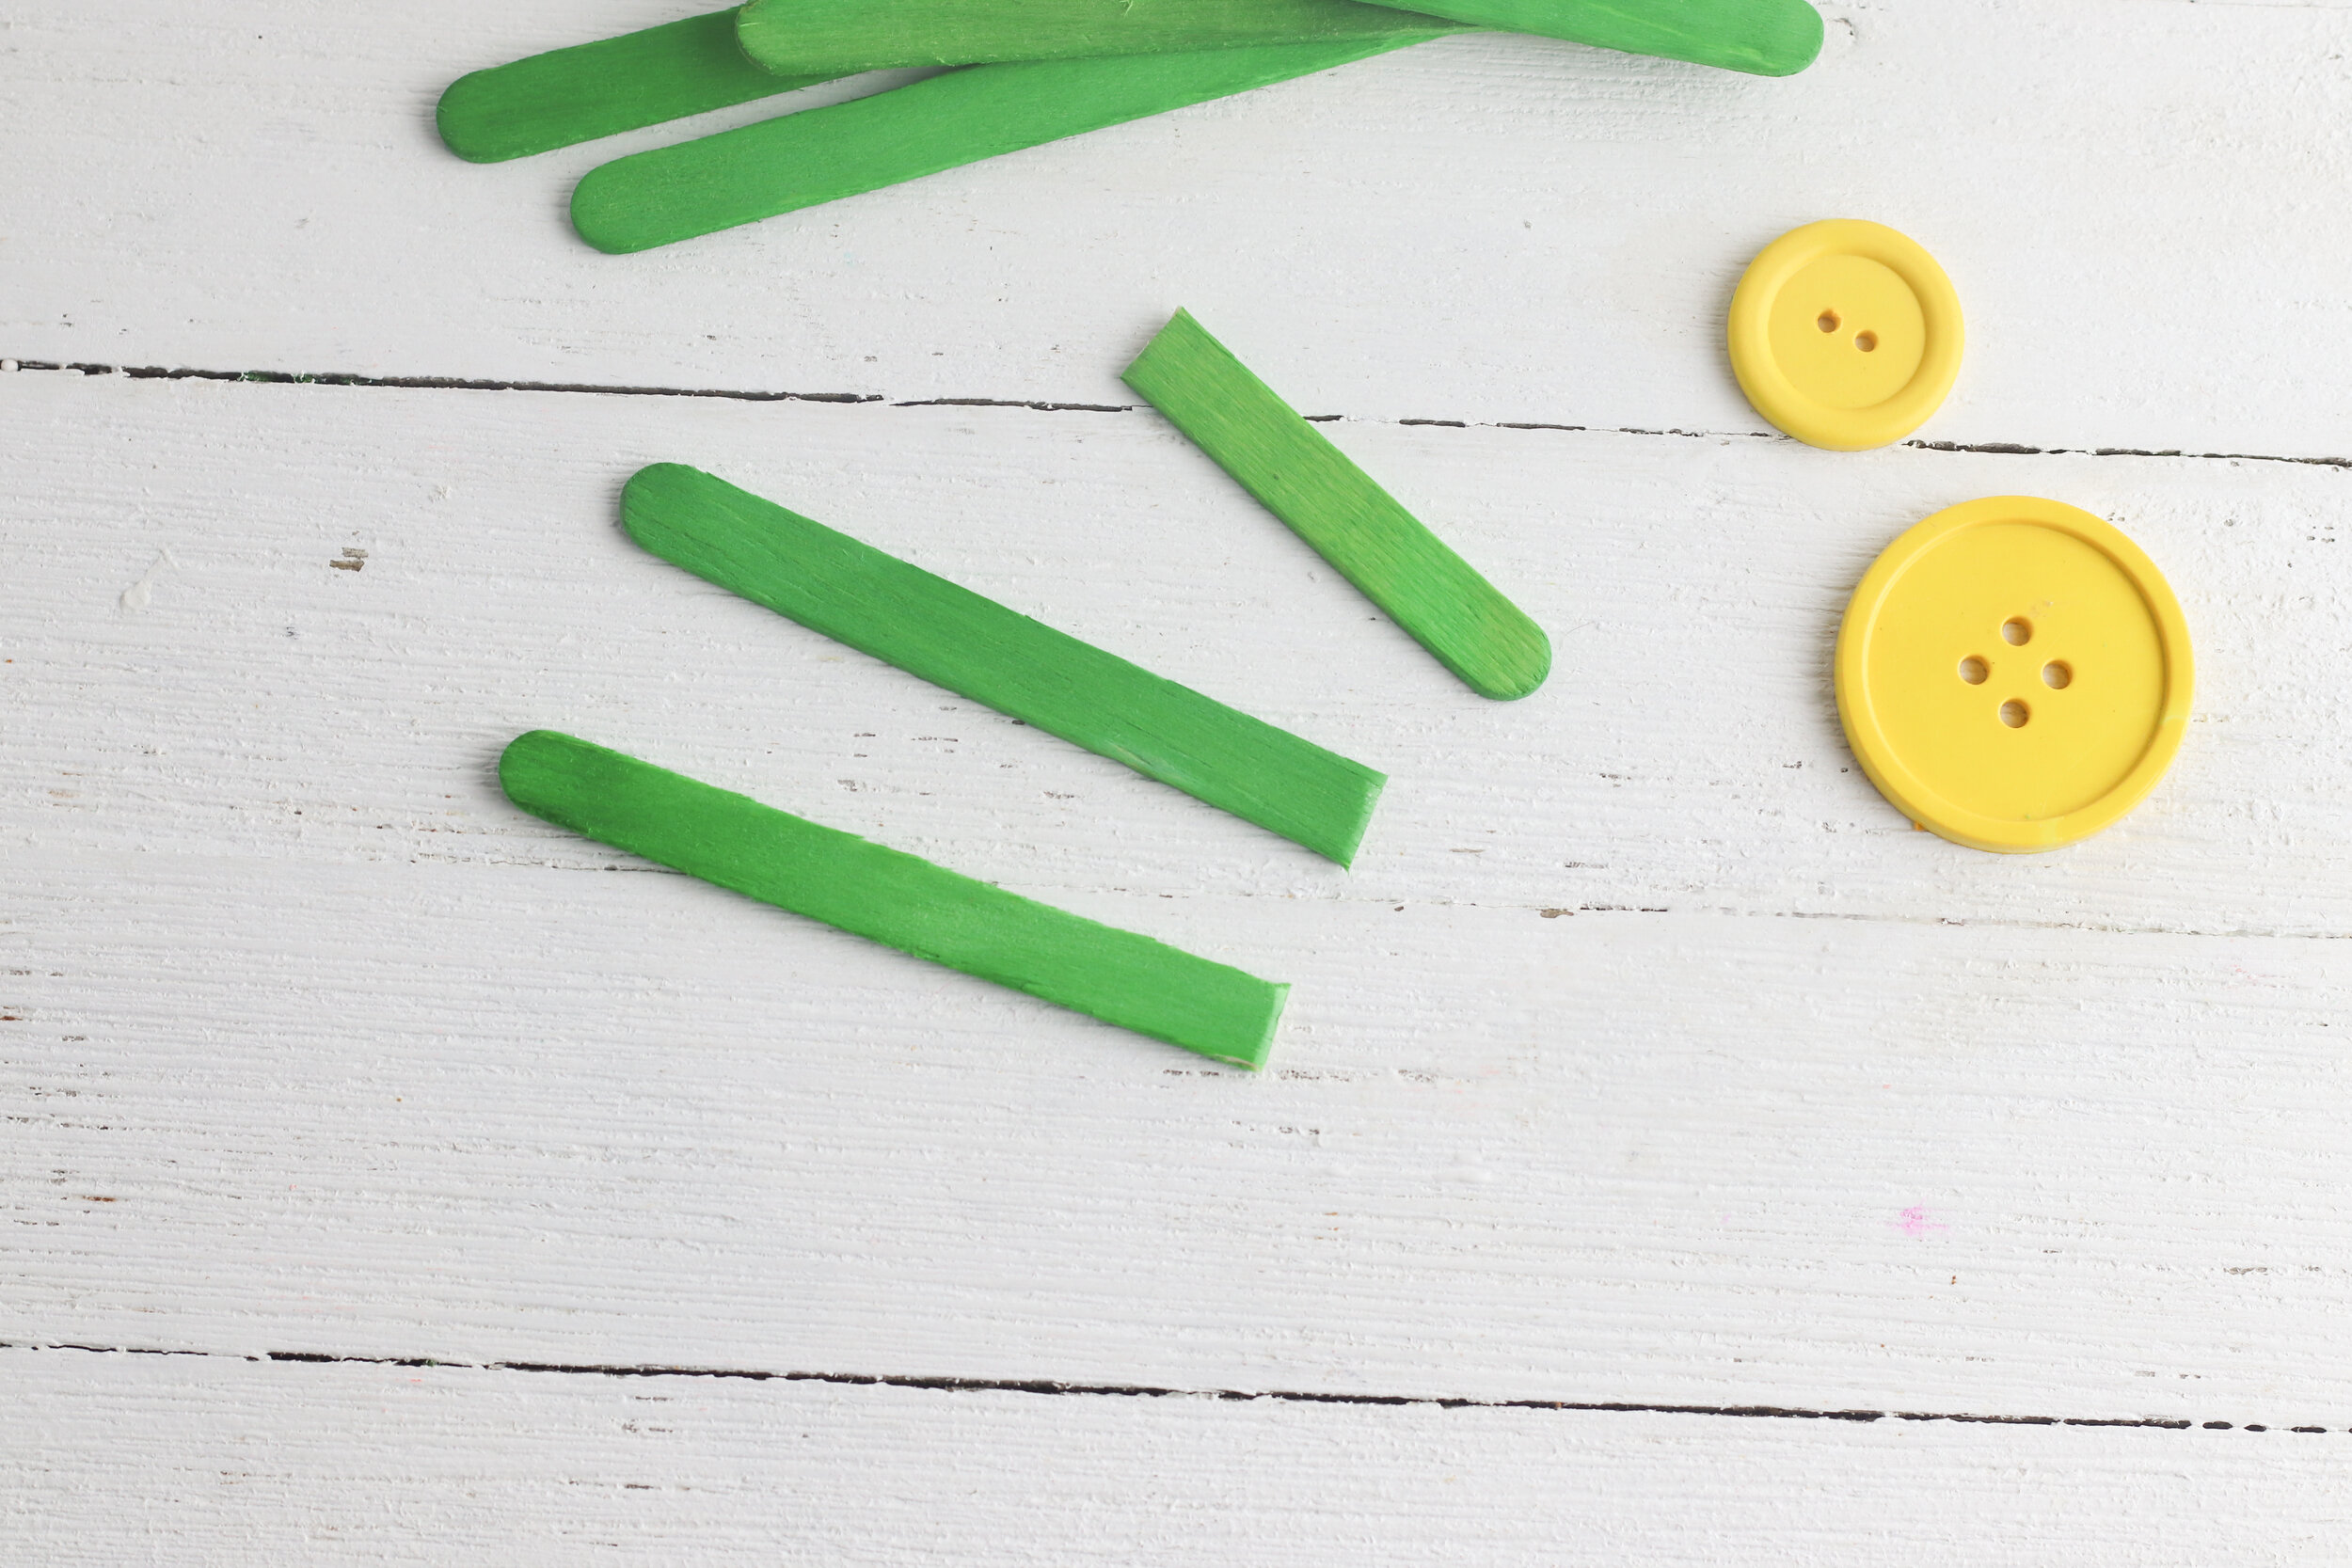 Tractor Popsicle Stick Craft for Kids: Easy, Simple and Fun